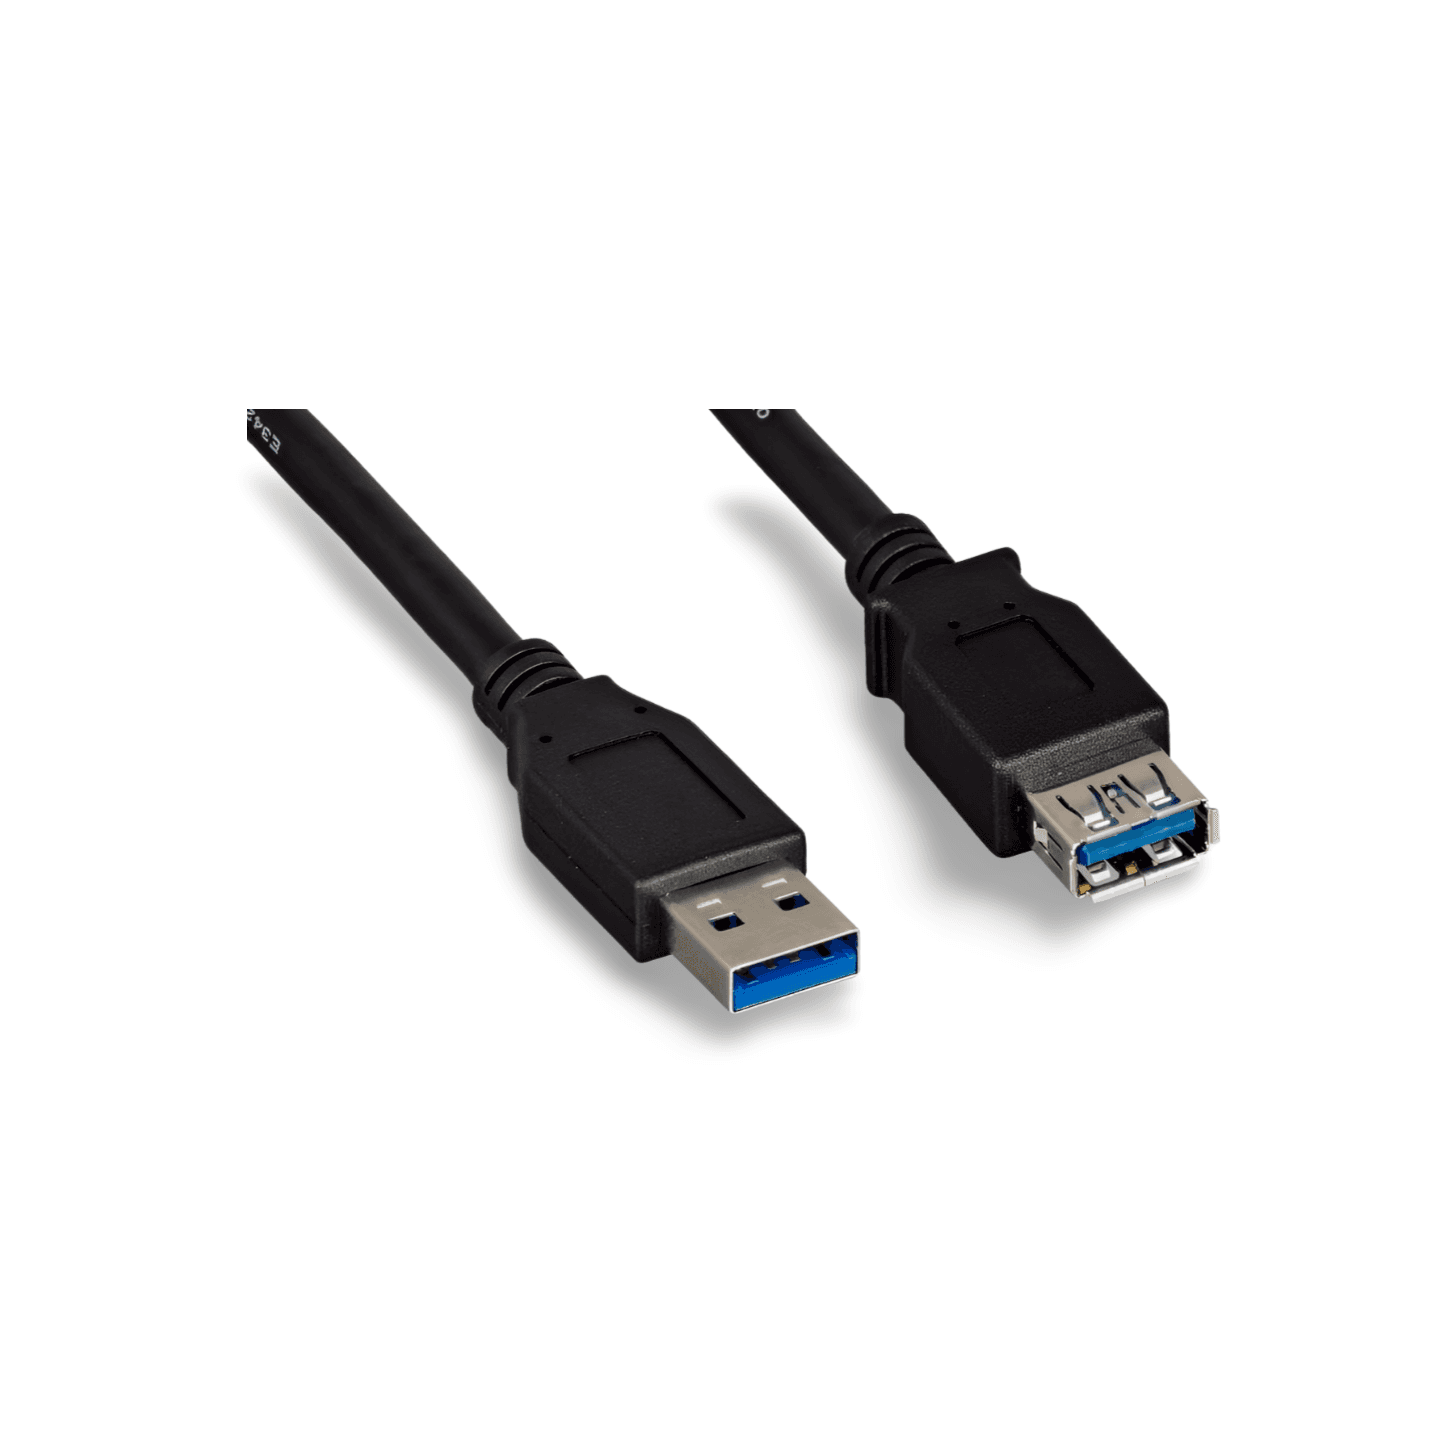 10ft USB 3.0 SuperSpeed A Extension Cable black